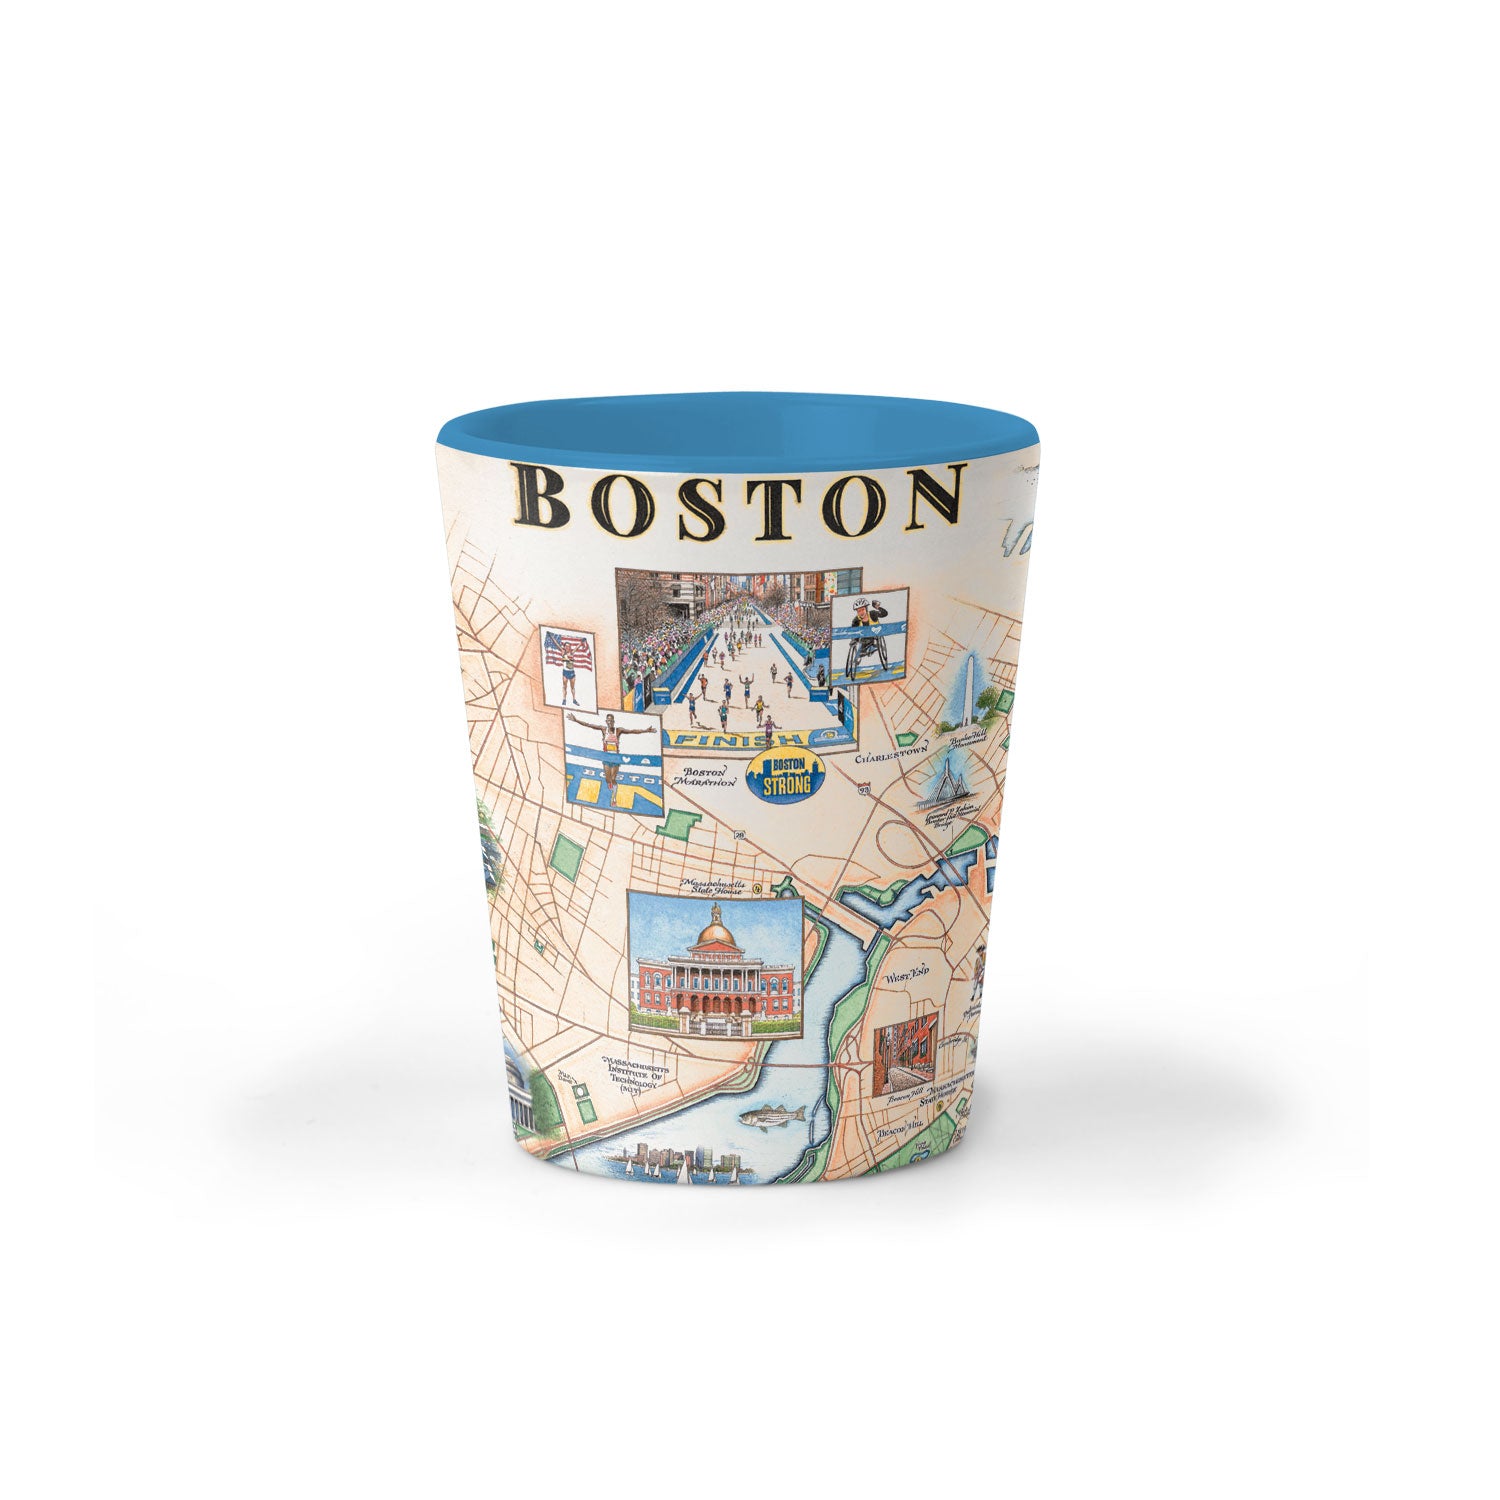 Boston city Map Ceramic shot glass in Earth Tone colors. Featuring Boston Strong, Boston Marathon, Fenway Park, Museum of Fine Arts, Massachusetts State House, and Bunker Hill Monument.